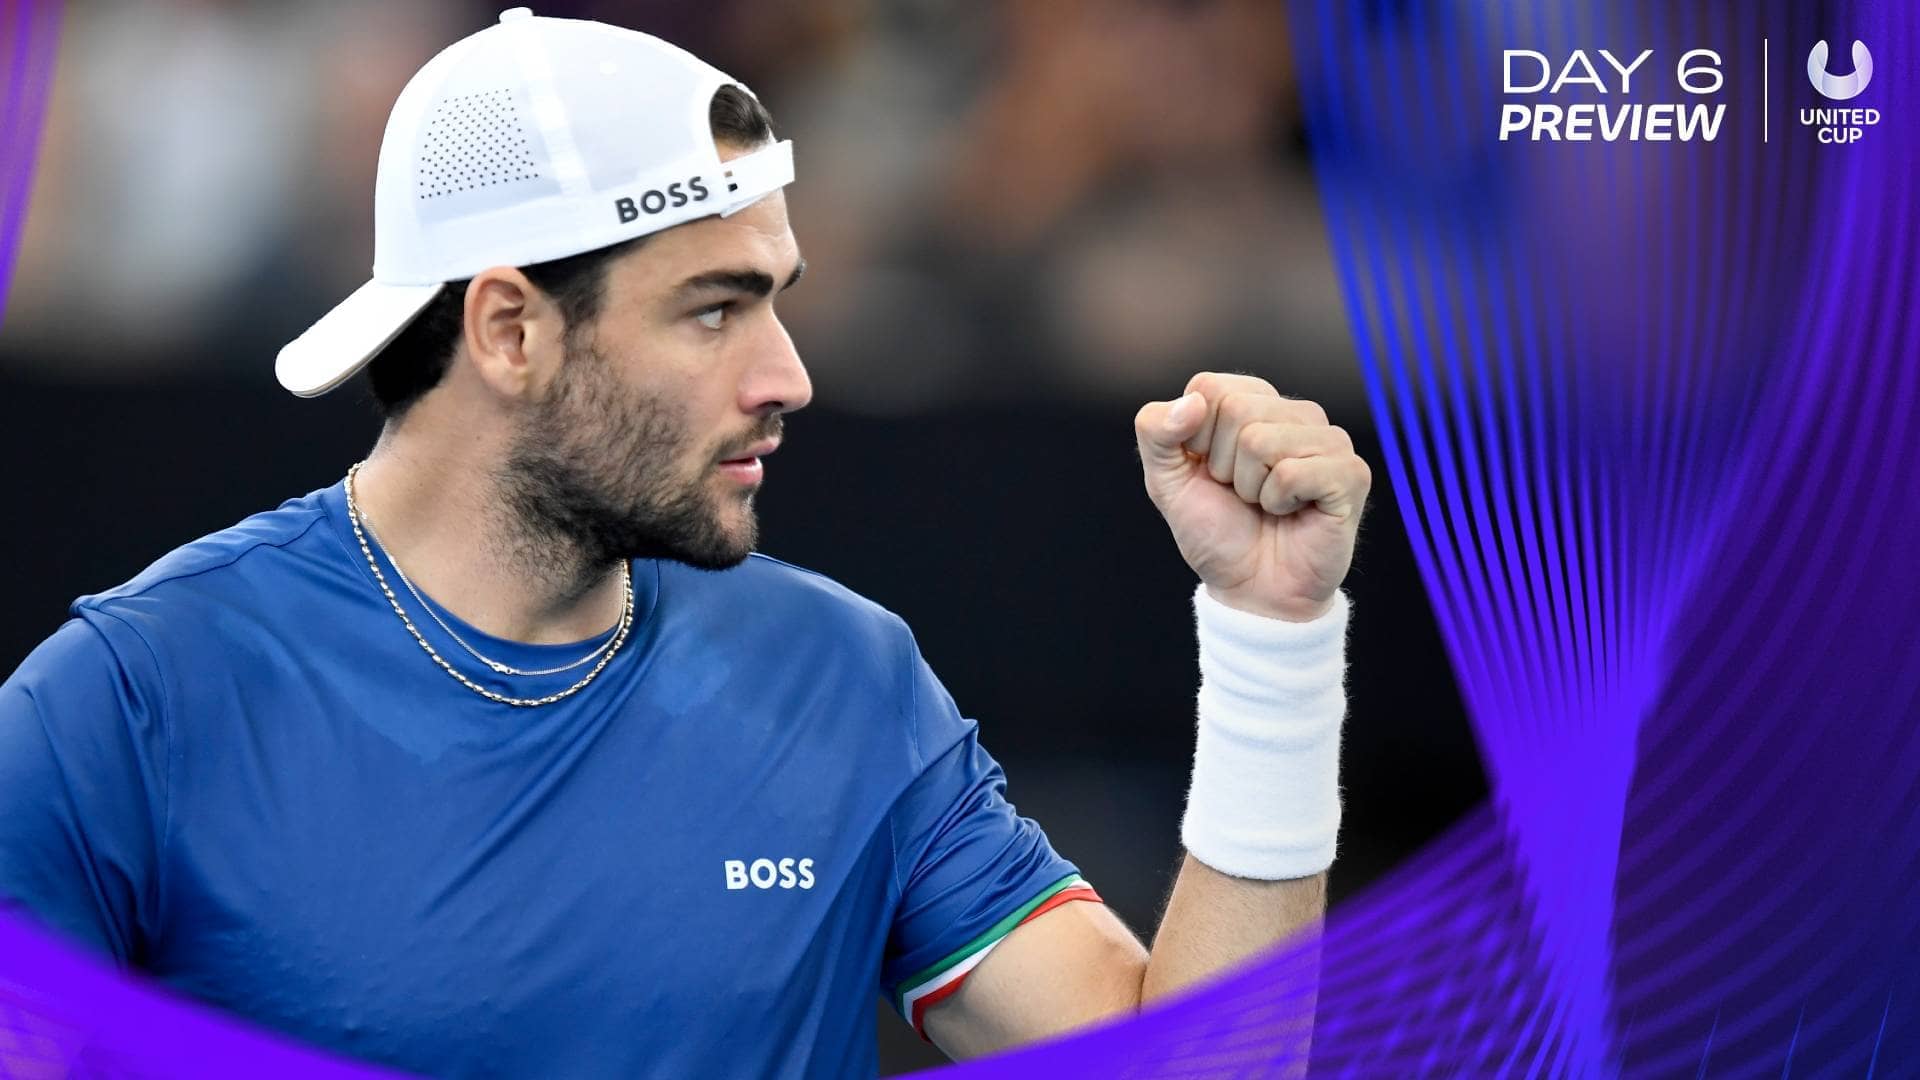 United Cup Day 6 Preview Italys Berrettini Meets Ruud With Chance To Clinch Group ATP Tour Tennis